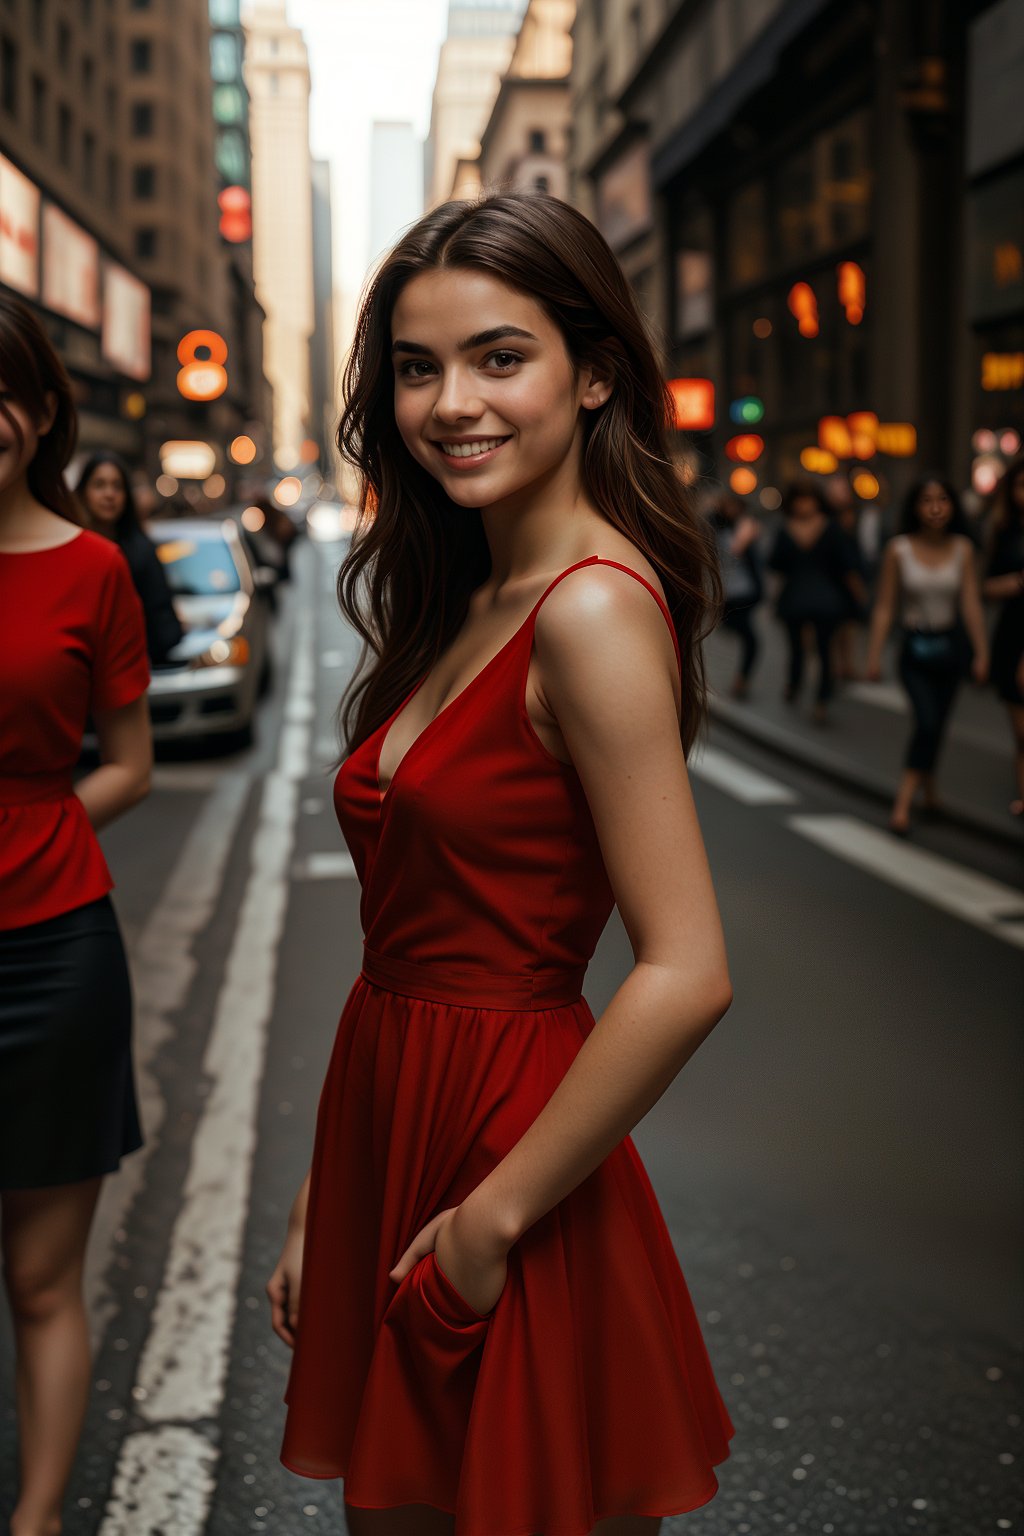 A vibrant young woman stands confidently on a bustling city street, her bright red dress accentuating her smile as she gazes out at the camera. The framing captures her from the waist up, with a shallow depth of field blurring the background. Soft natural light dances across her face and shoulders, adding warmth to her features. Her pose is relaxed yet alluring, as if inviting passersby to join in on the fun.